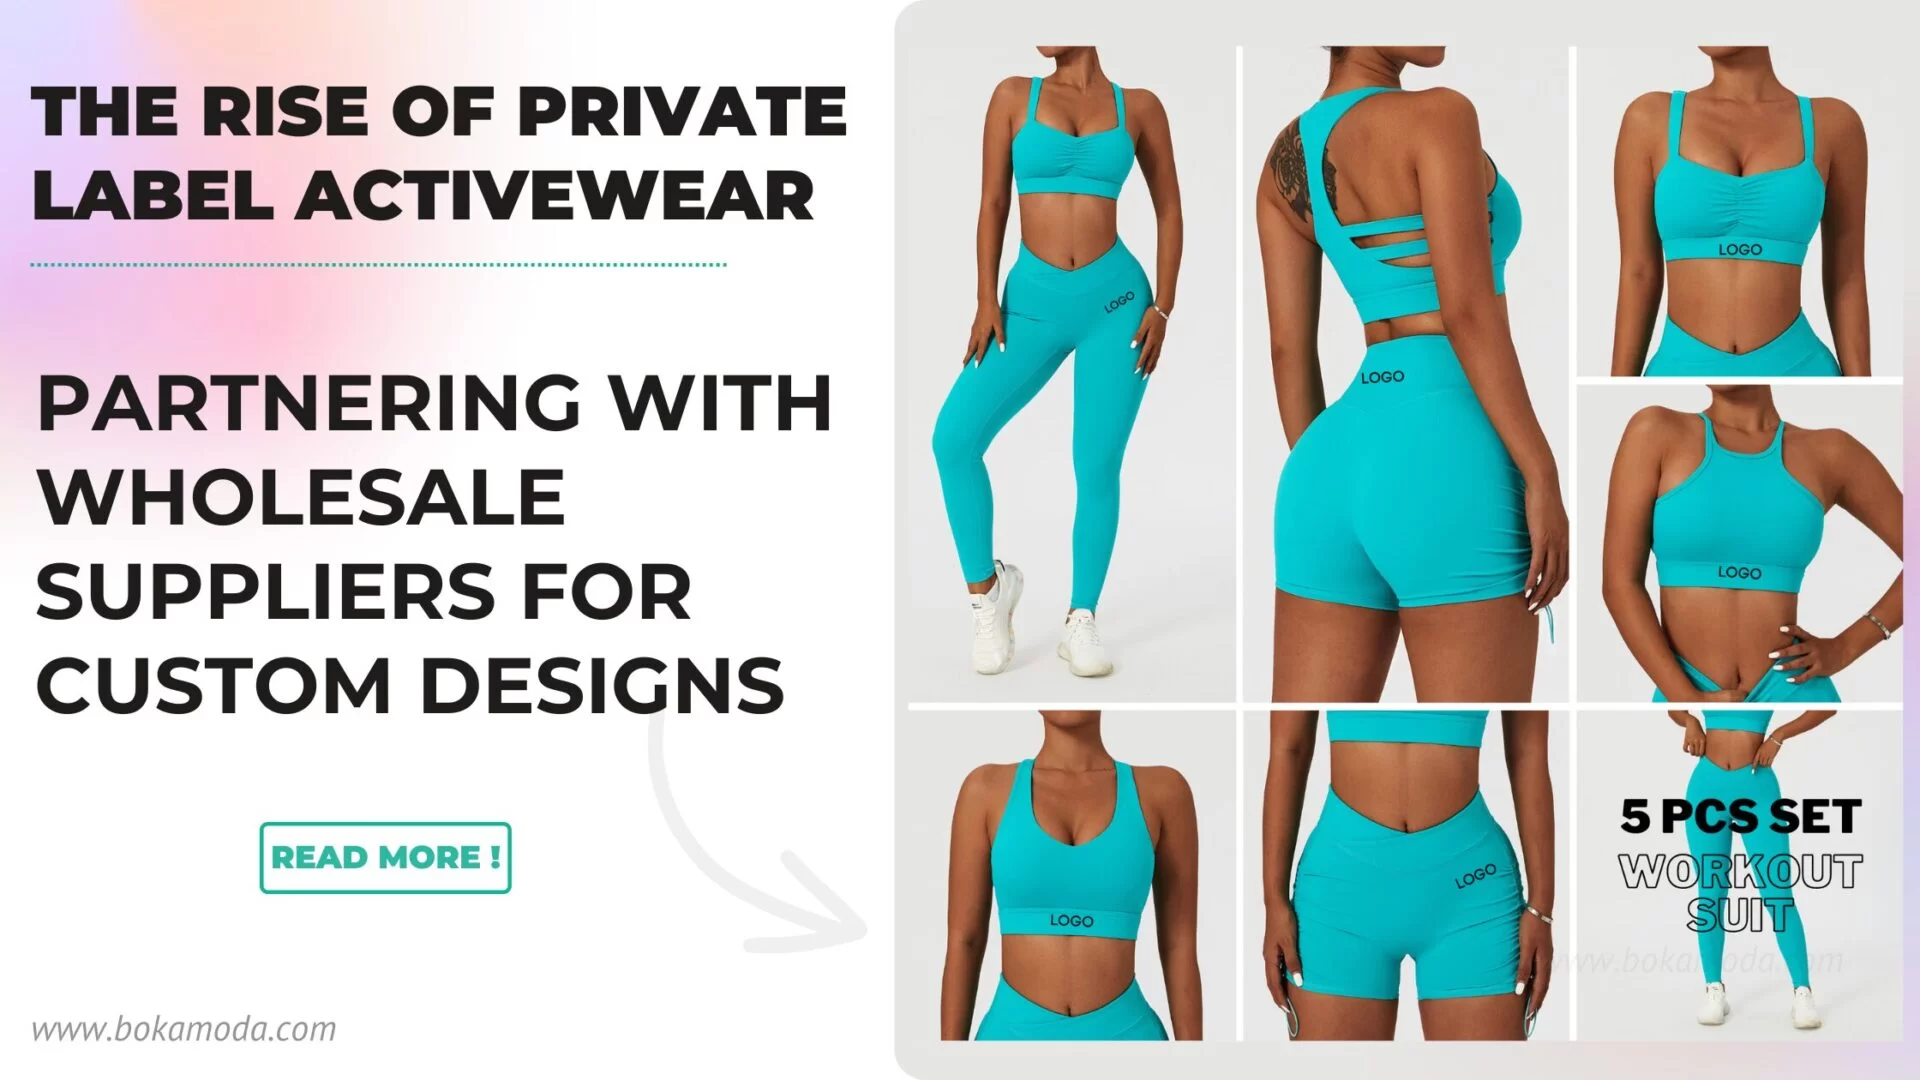 The Rise of Private Label Activewear: Partnering with Wholesale Suppliers for Custom Designs